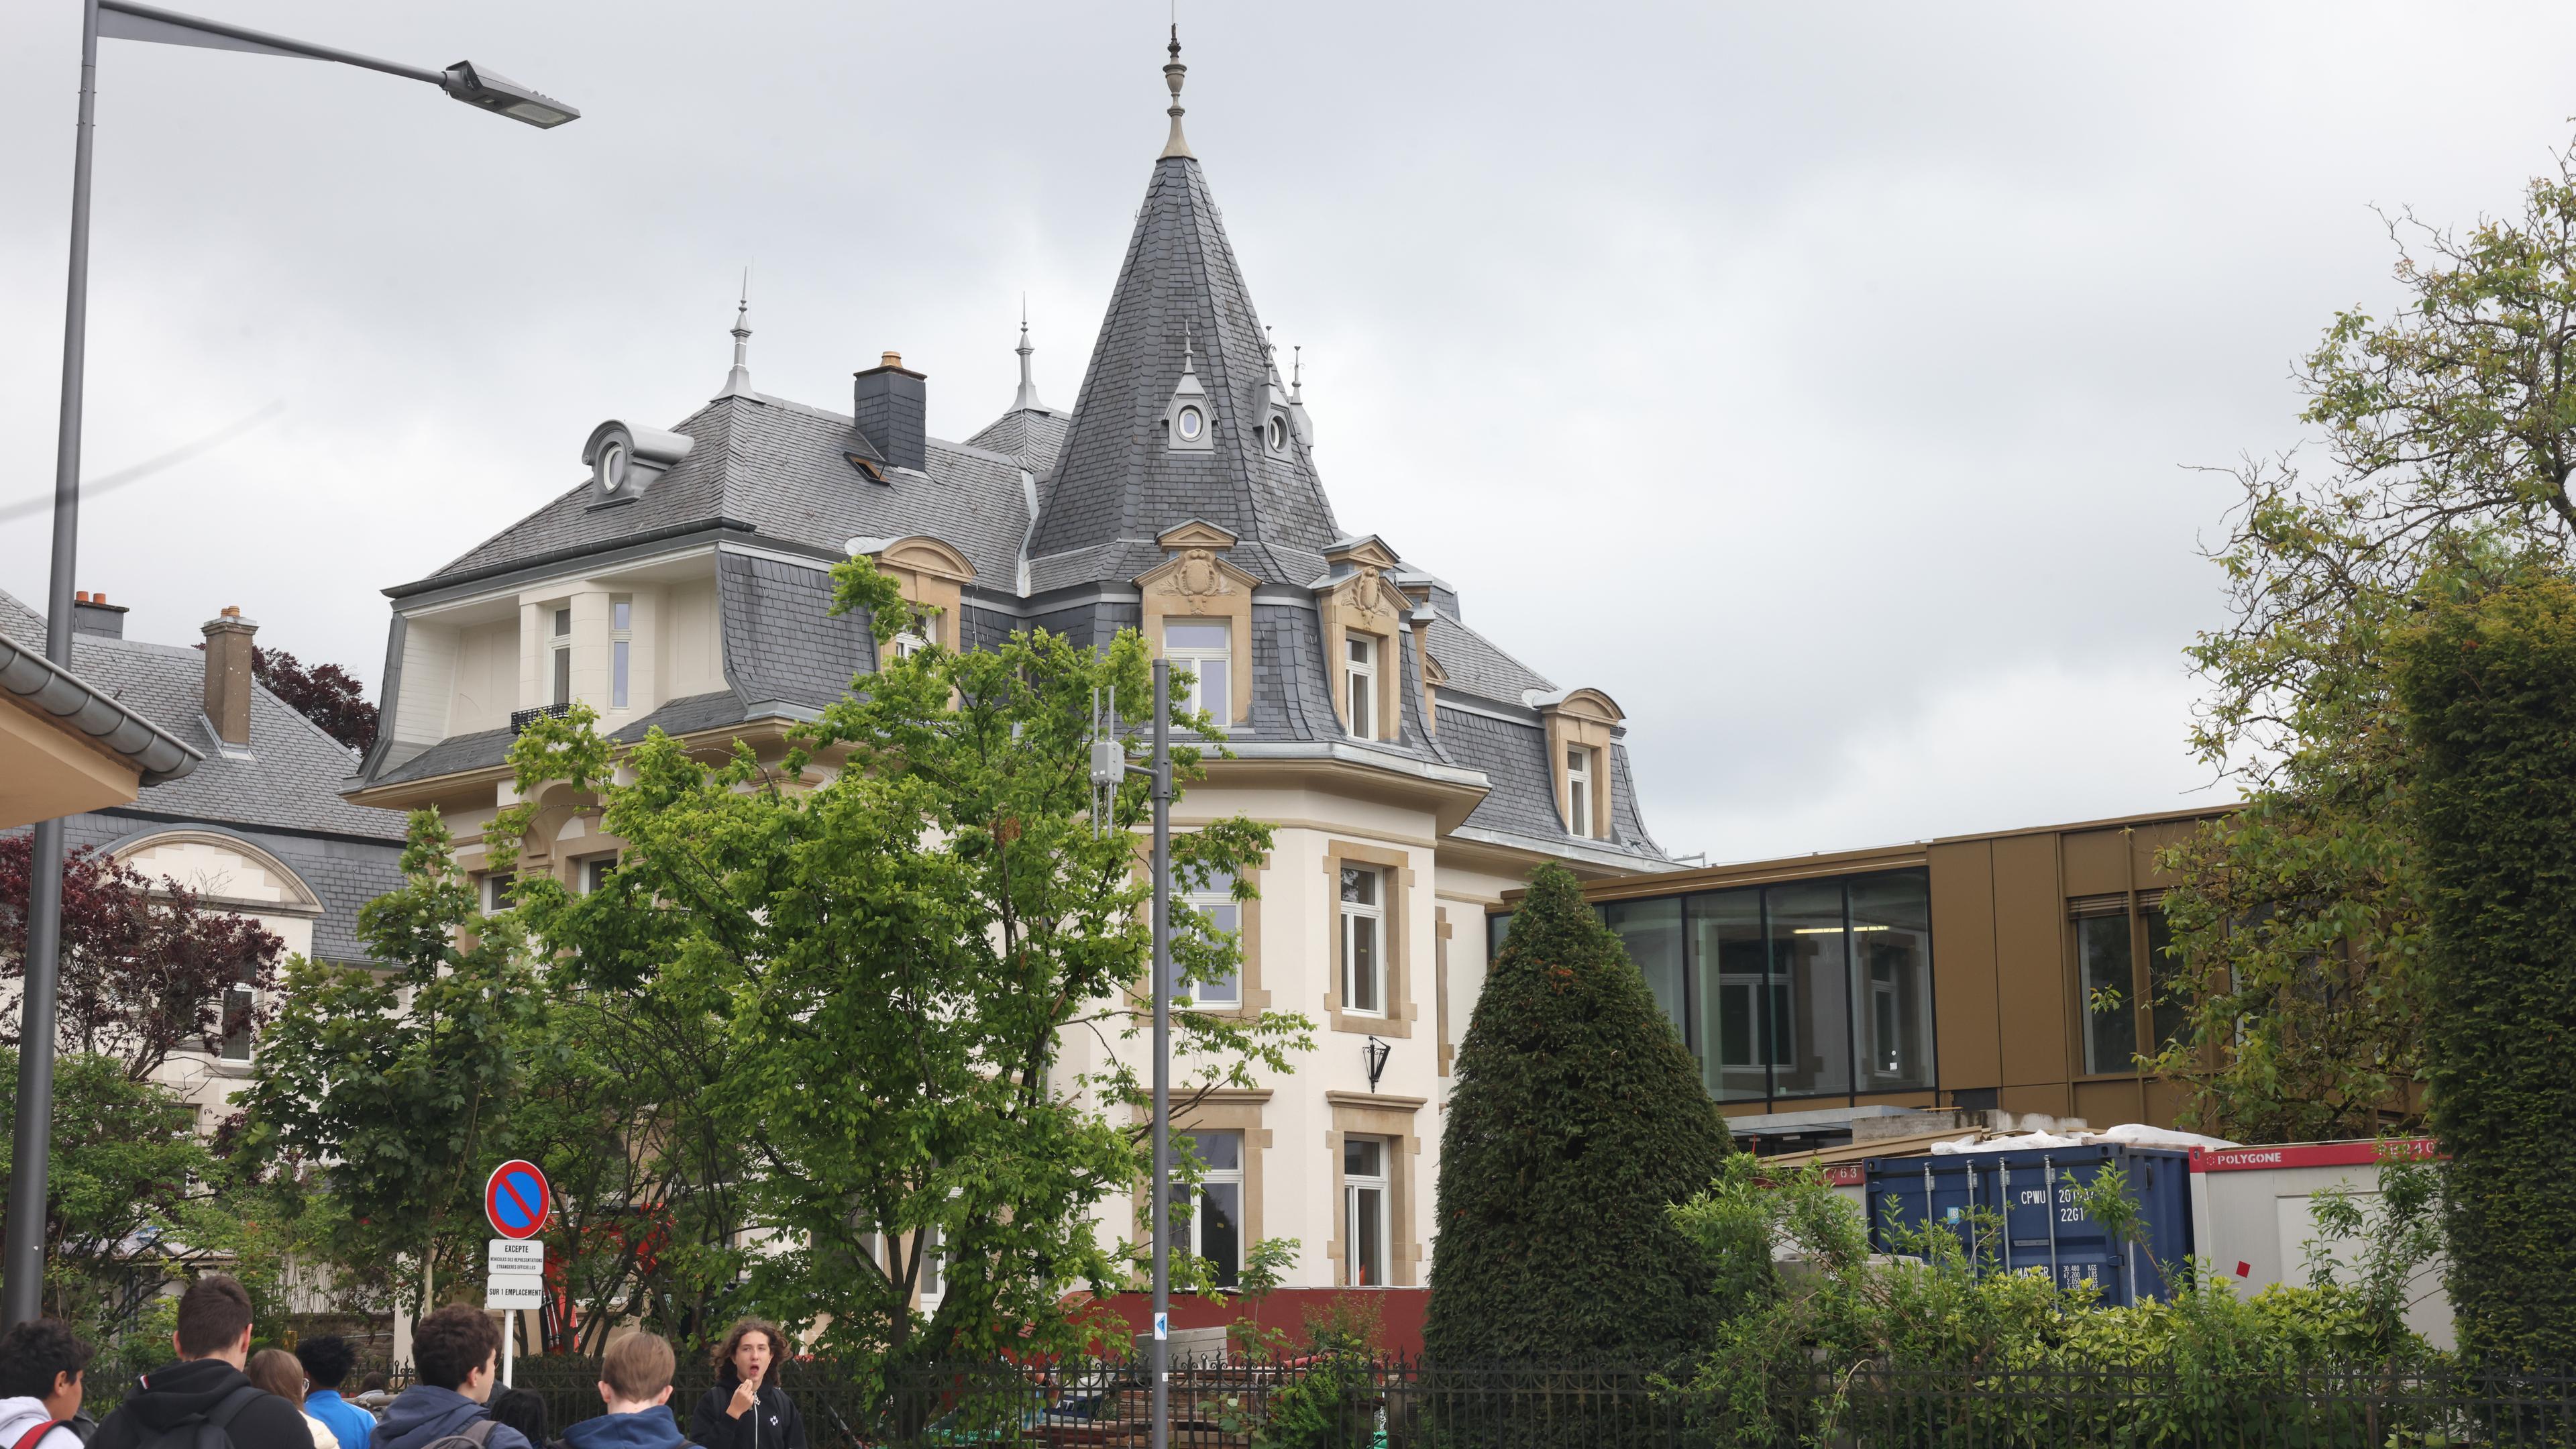 The SNCI purchased Villa Servais in 2019, but renovation work is still ongoing